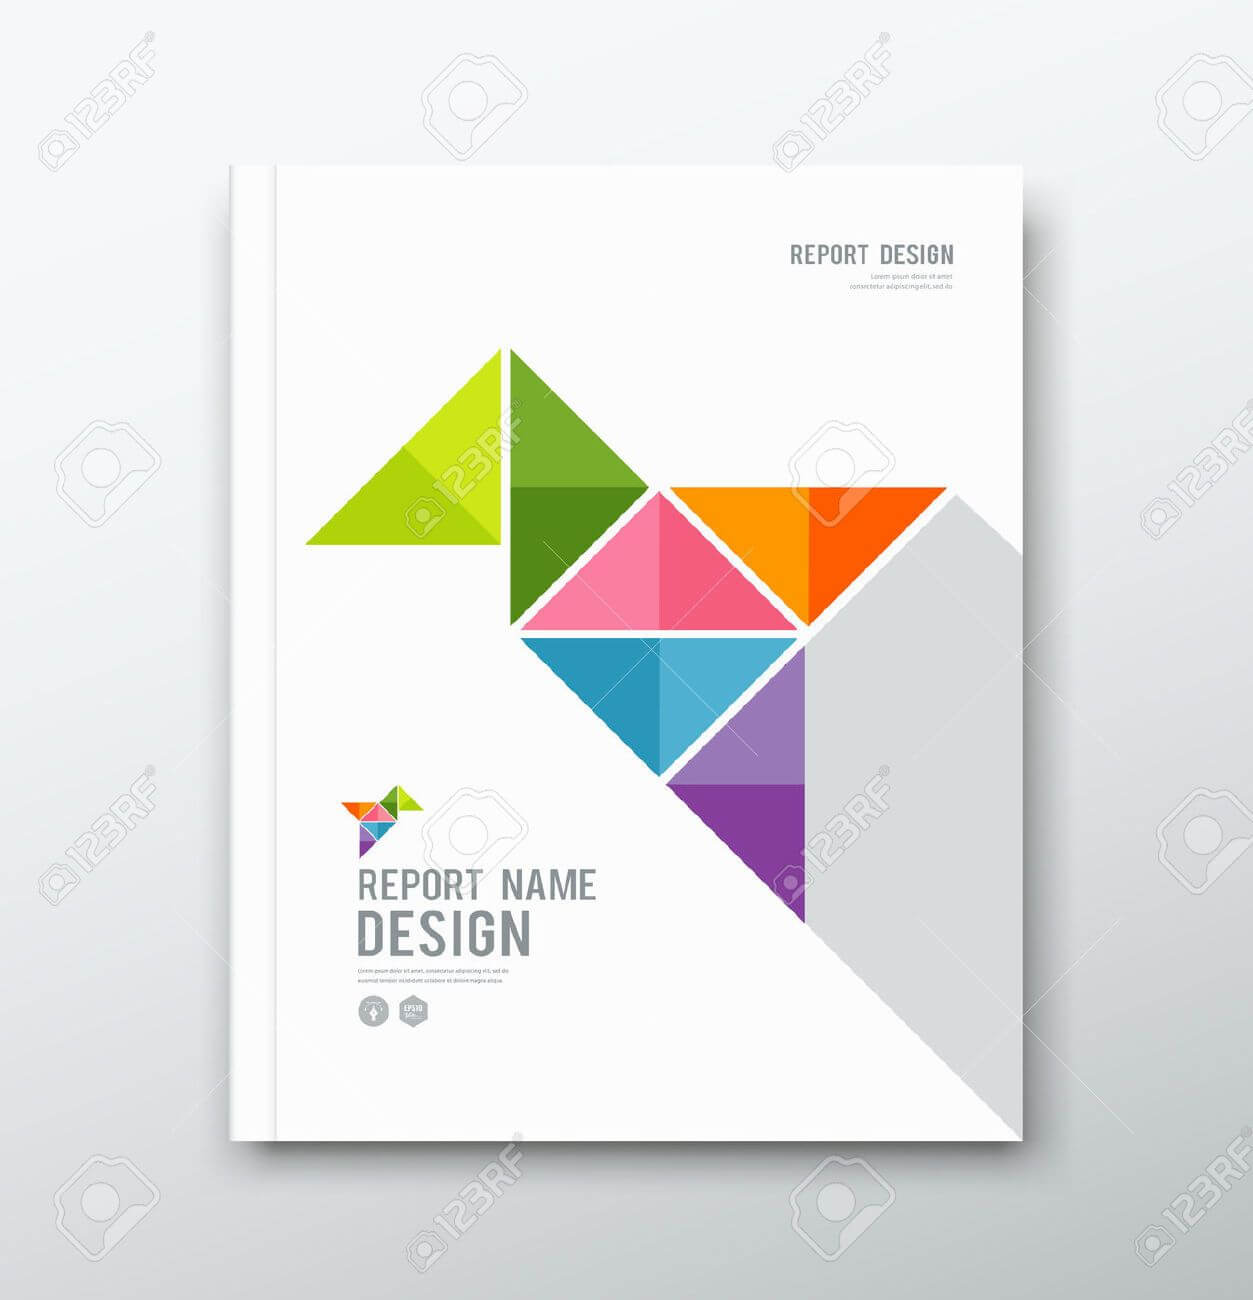 009 Word Cover Pages Template Exceptional Ideas Business Within Microsoft Word Cover Page Templates Download